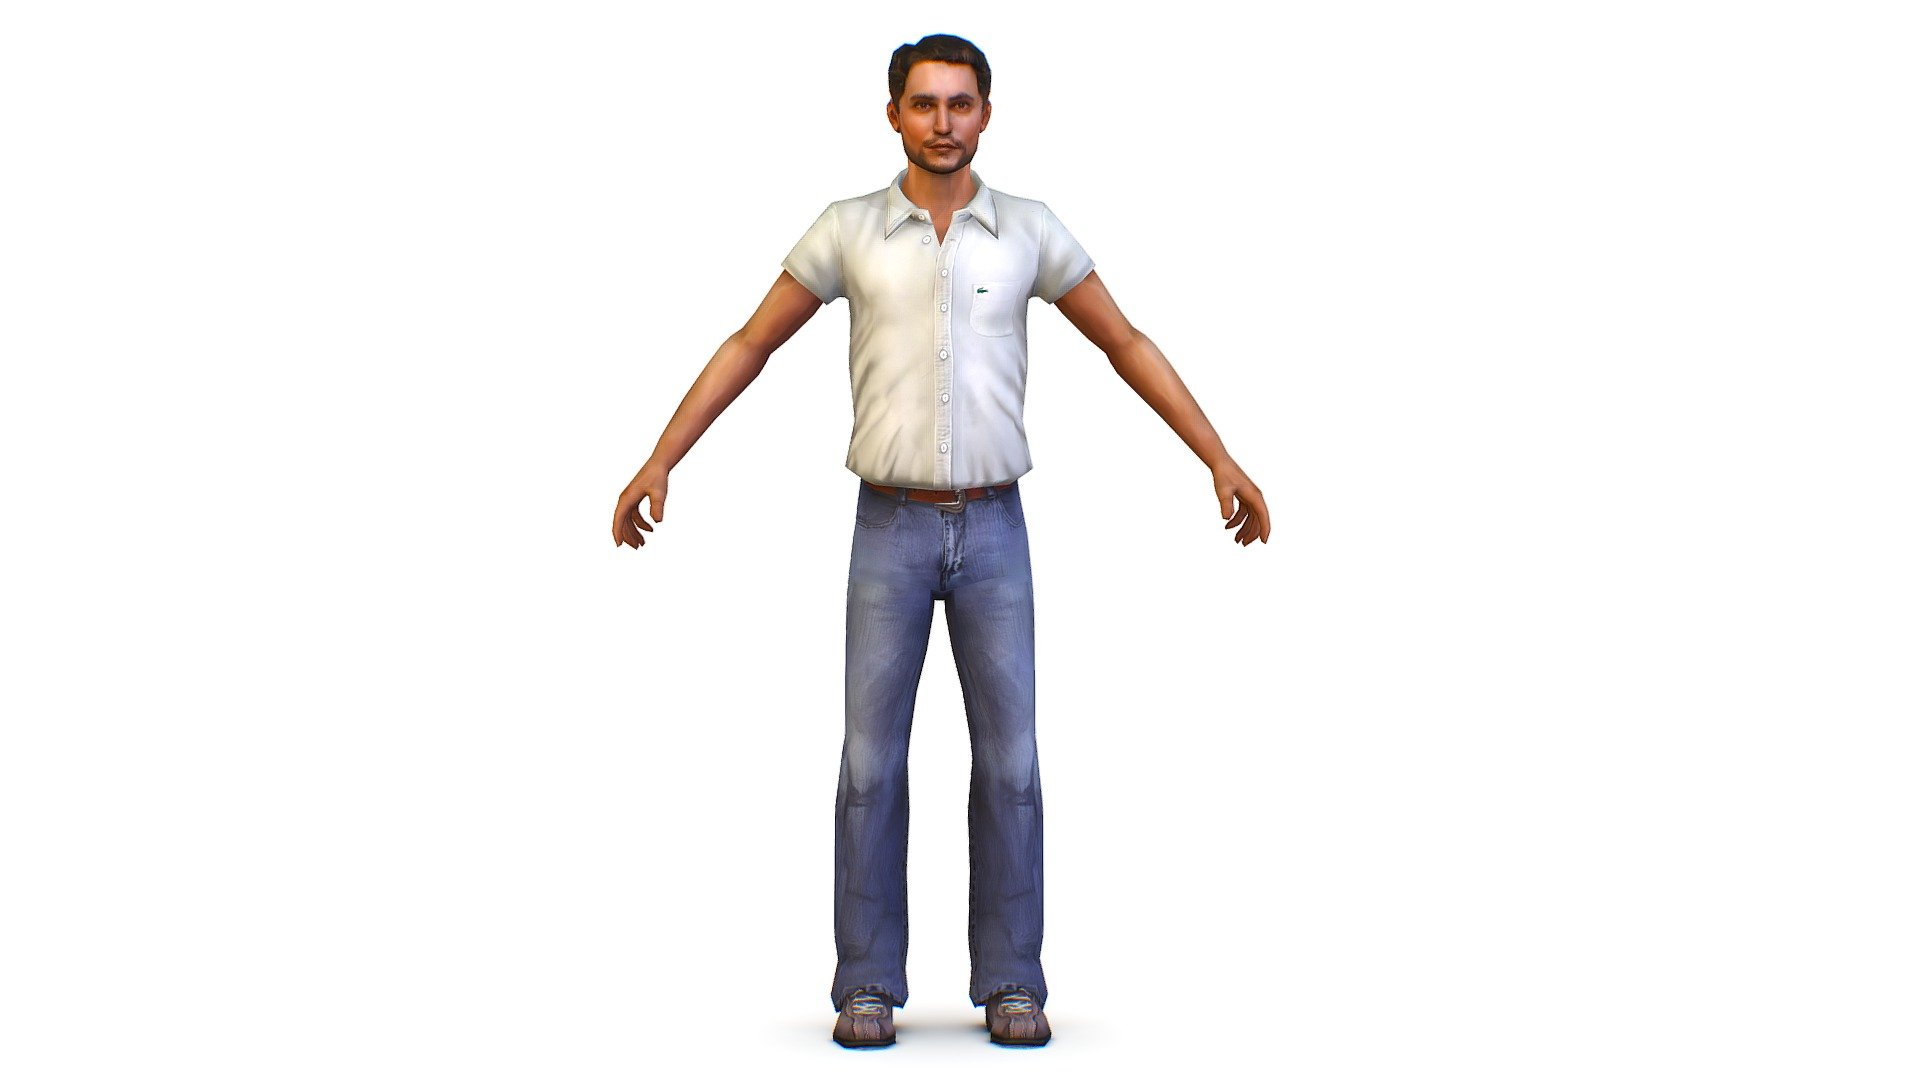 1 color textures 4096x4096

2100 poly count


3dsMax / Maya file included




Support me on Patreon, please - https://www.patreon.com/art_book


 - a young man in jeans and a white shirt - Buy Royalty Free 3D model by Oleg Shuldiakov (@olegshuldiakov) 3d model